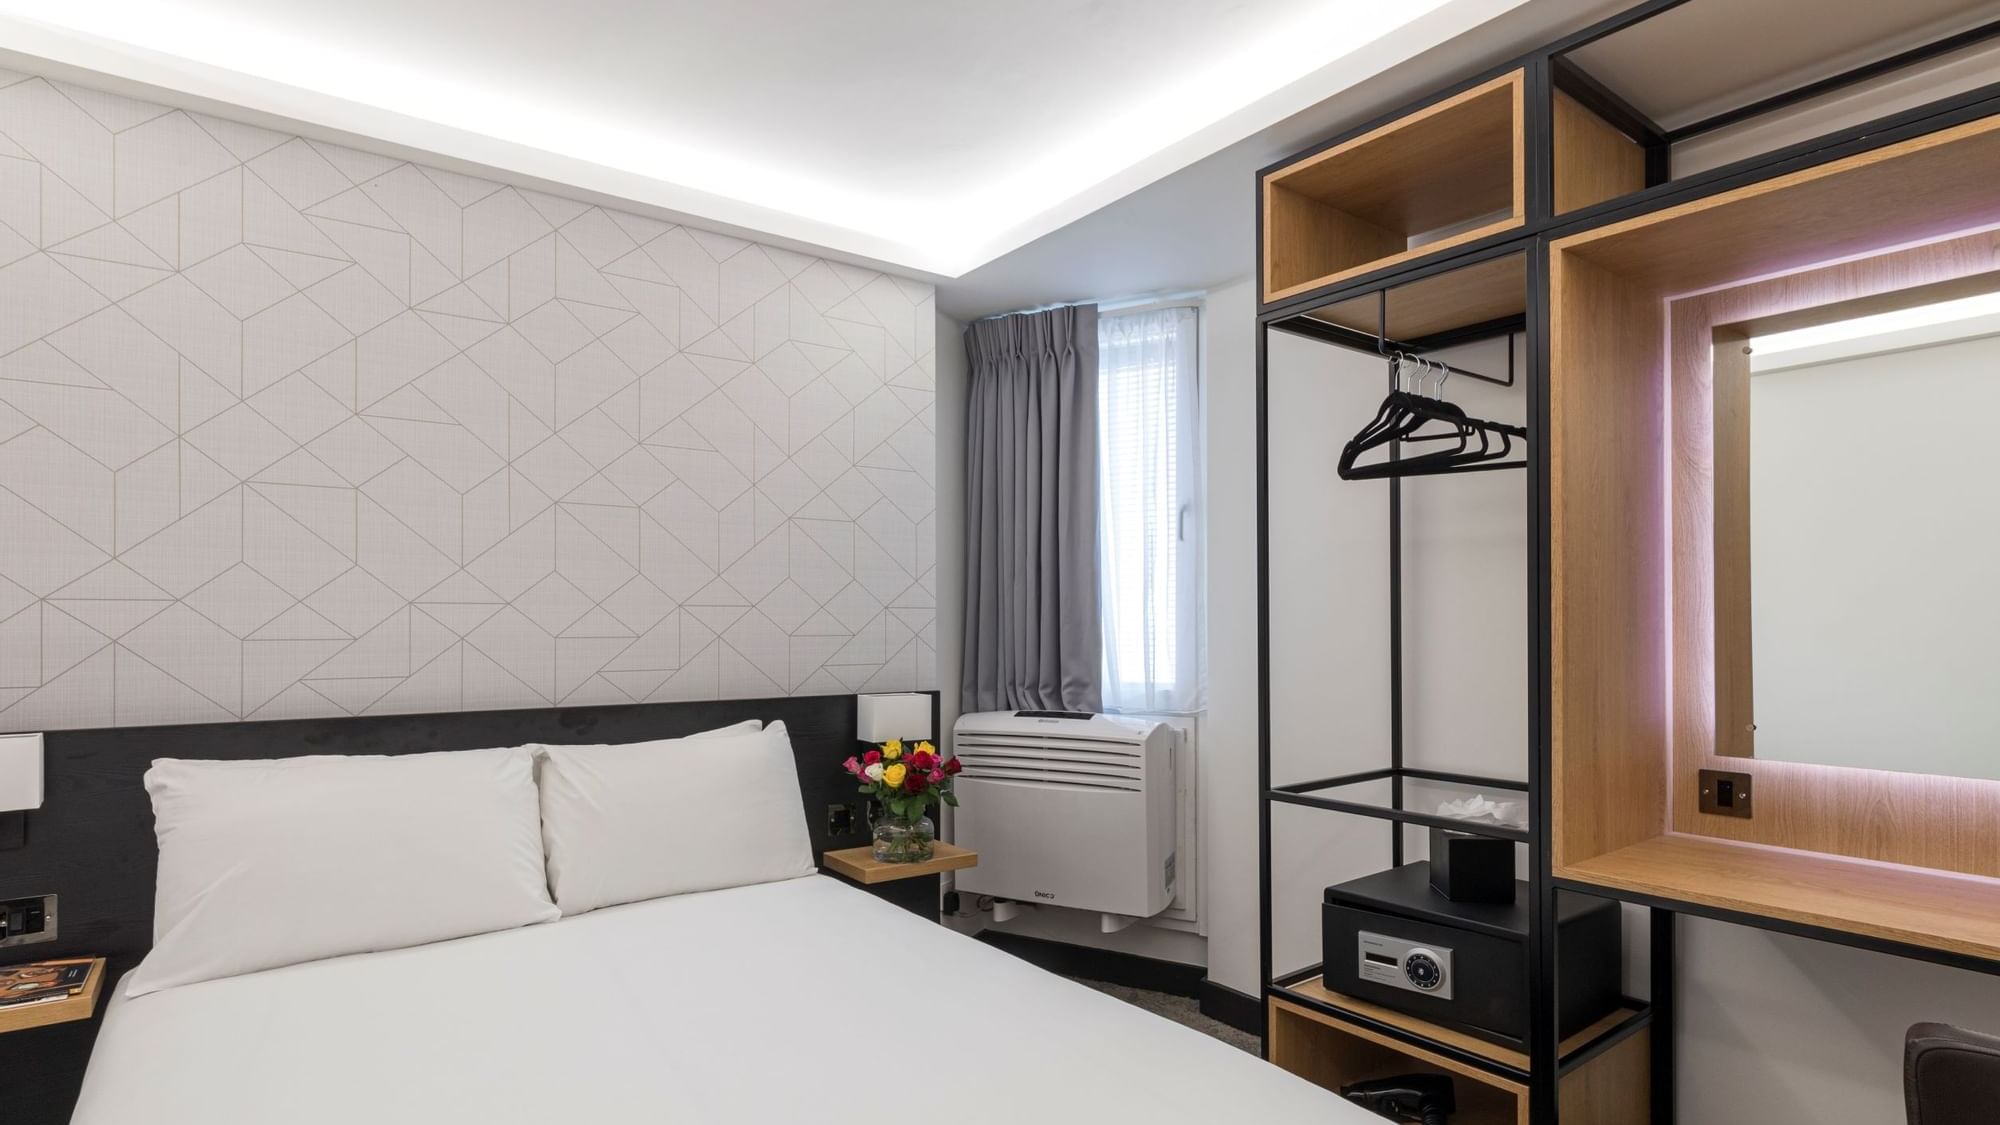 Newly Renovated Modern Hotel Rooms | St Giles London Hotel